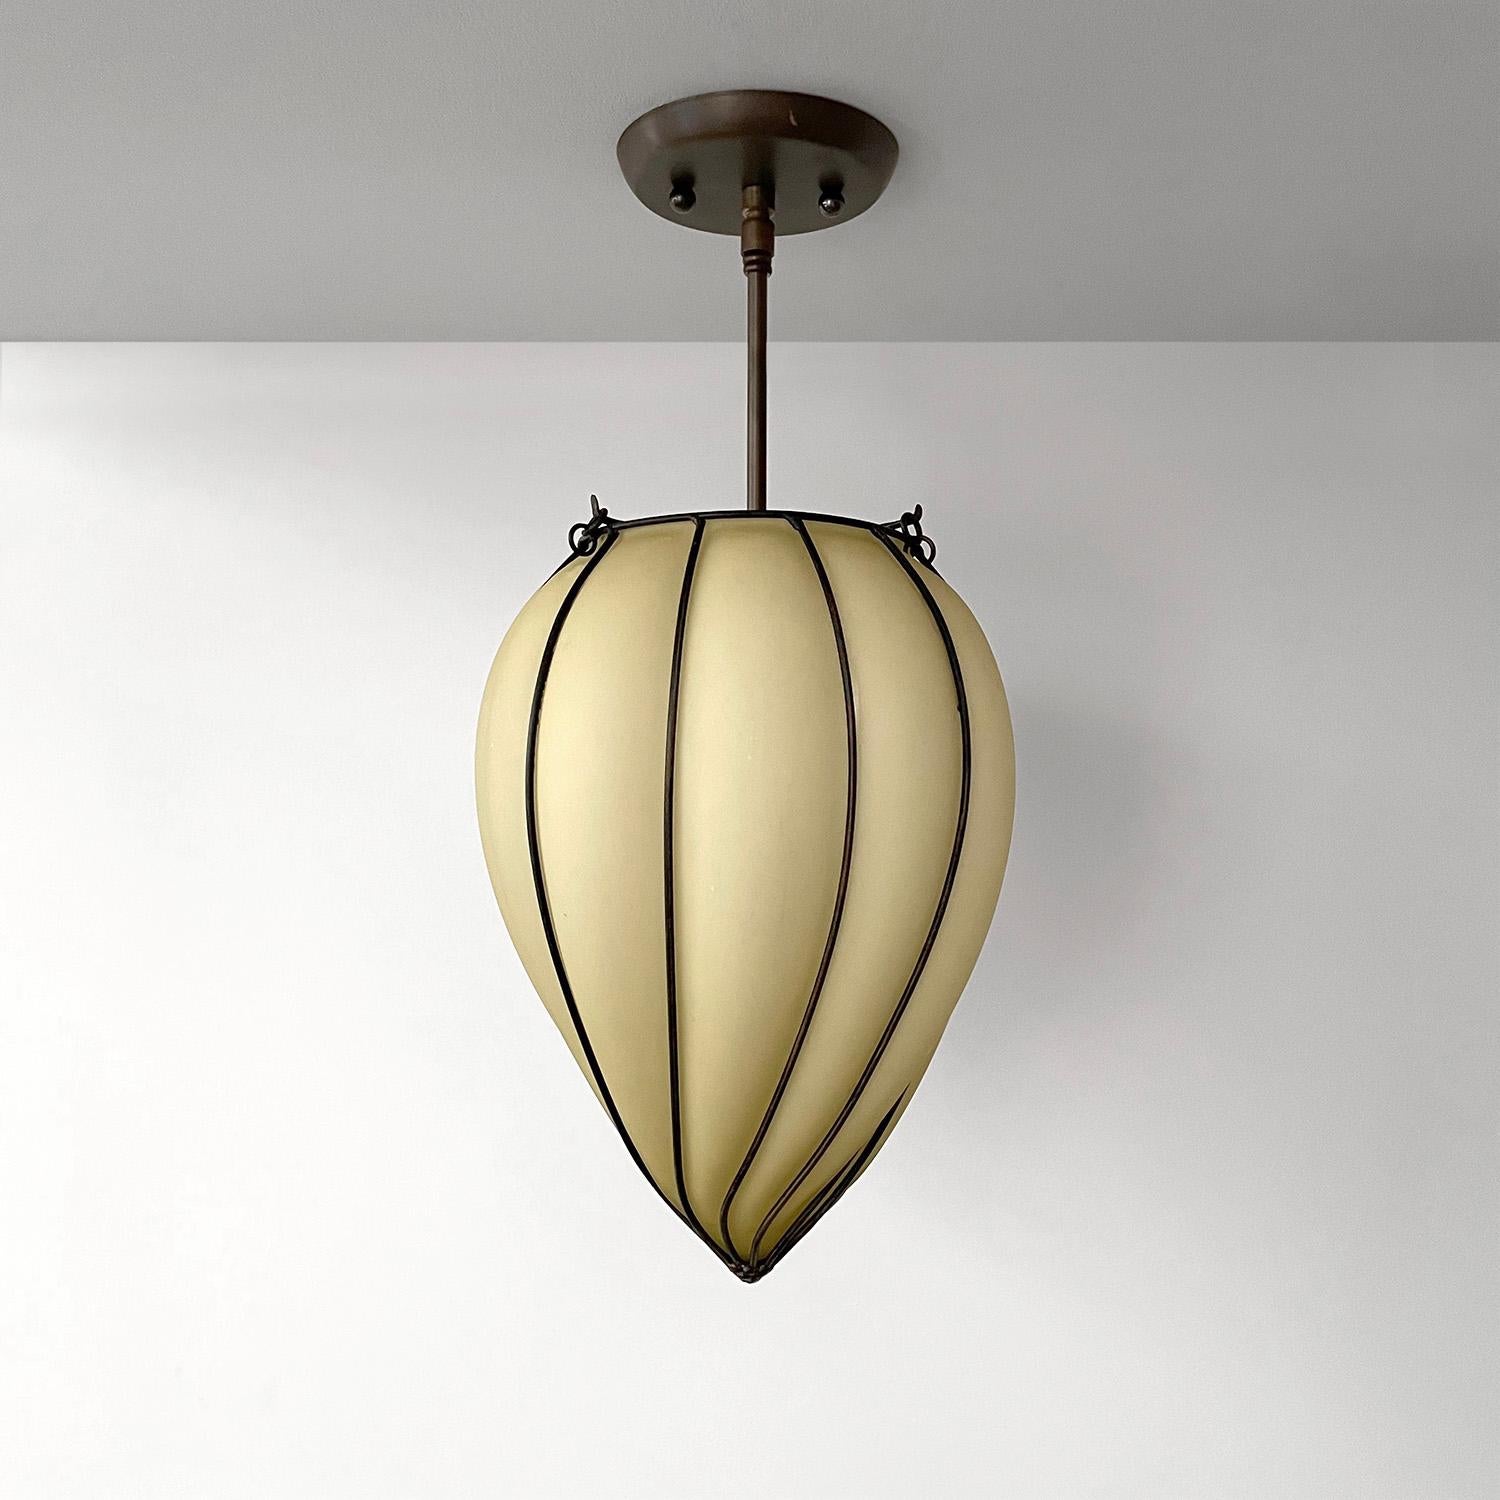 French Art Deco teardrop pendant ceiling light
France, 1930’s 
Handblown molded teardrop shape shade encompassed in a sculpted iron frame
Illuminates light beautifully 
Small area with indentation created in the manufacturing process
Please